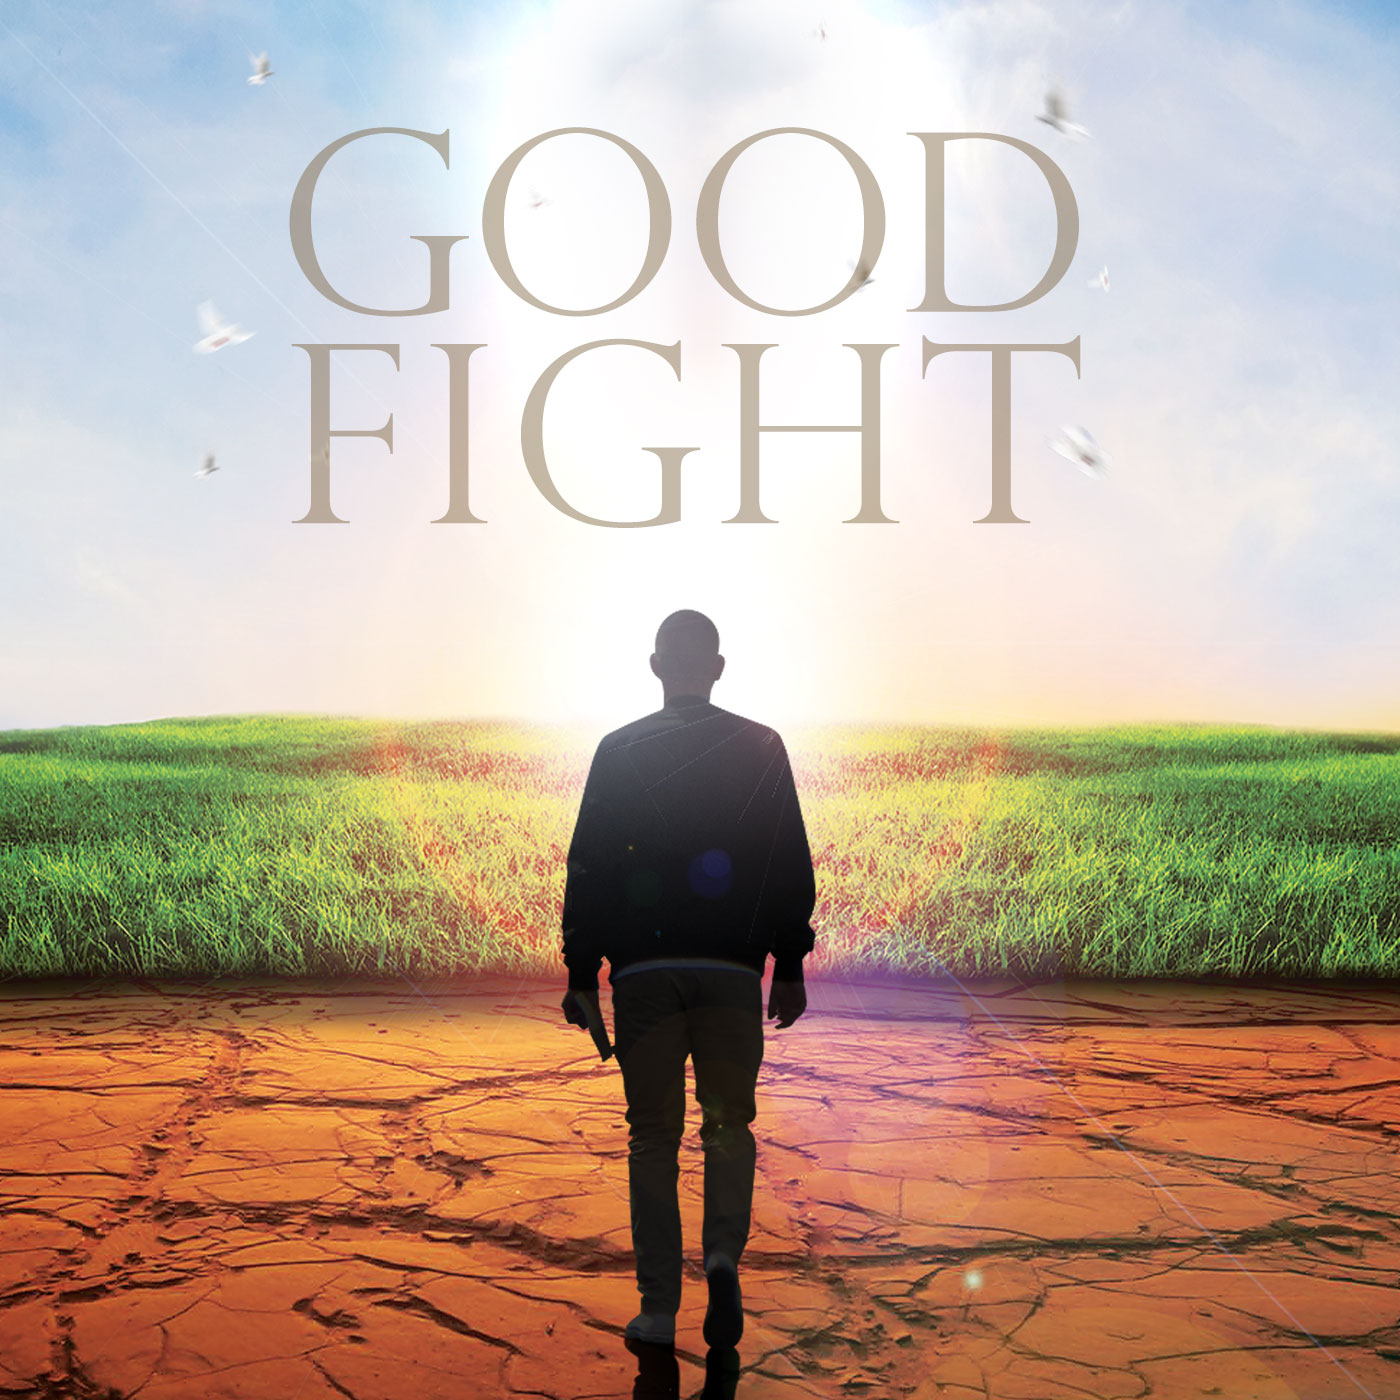 Good Fight - Persuaded Witness - Chris Wall - 2-24-2019